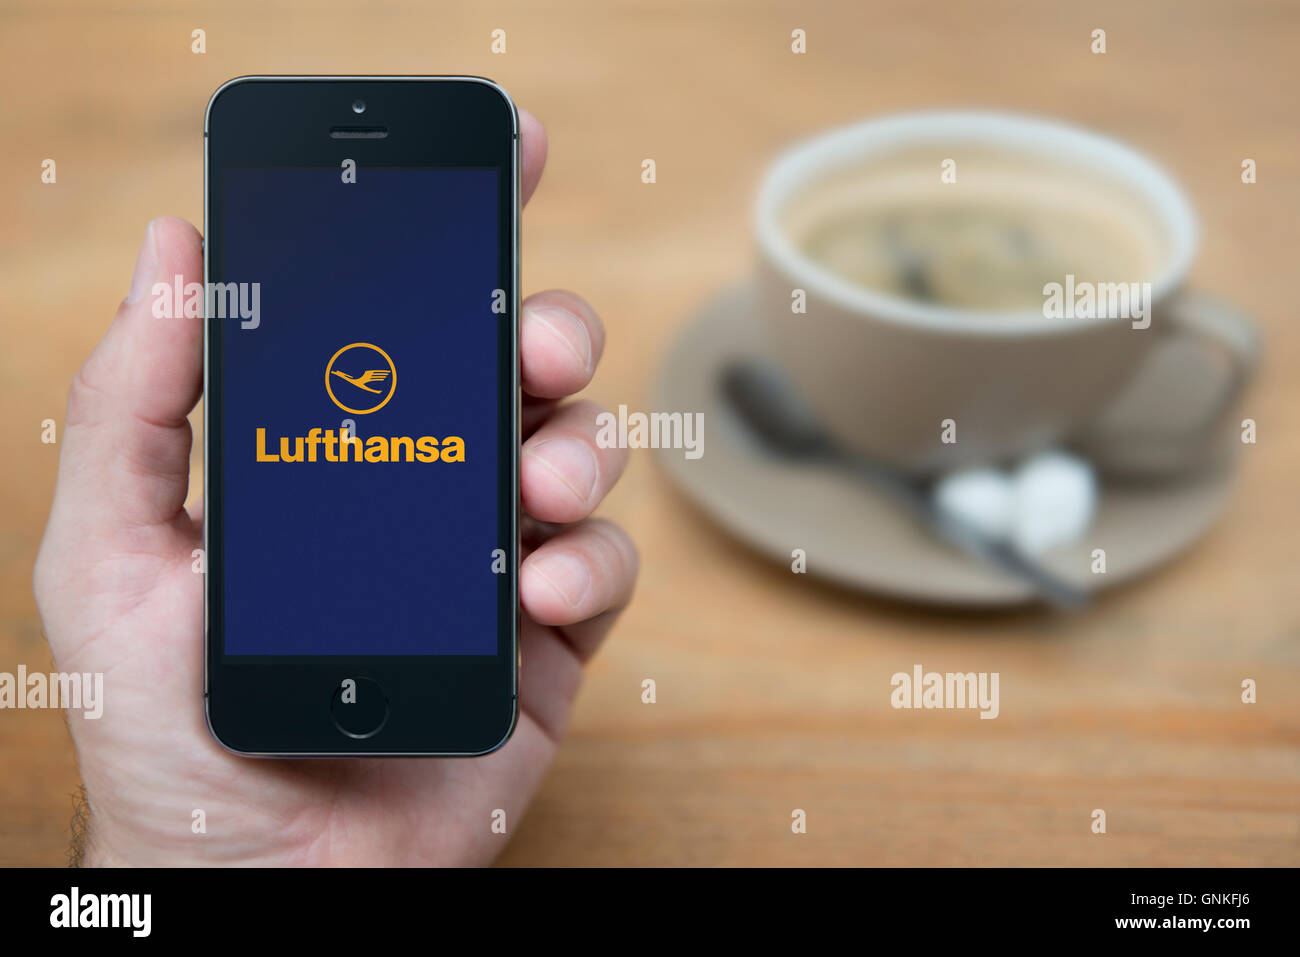 A man looks at his iPhone which displays the Lufthansa logo, while sat with a cup of coffee (Editorial use only). Stock Photo